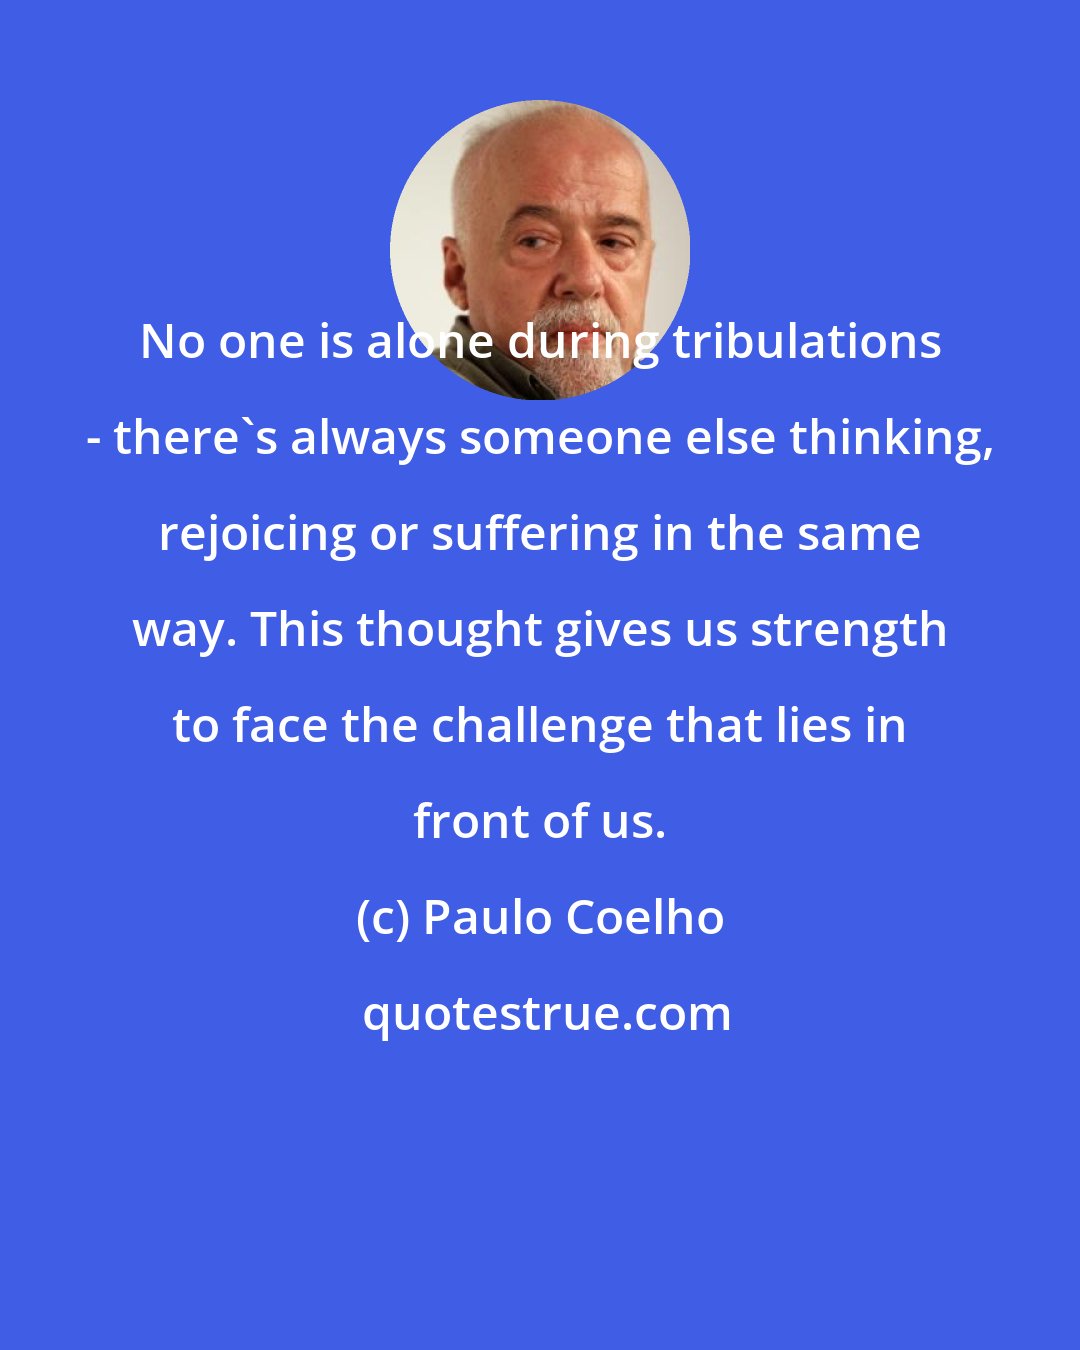 Paulo Coelho: No one is alone during tribulations - there's always someone else thinking, rejoicing or suffering in the same way. This thought gives us strength to face the challenge that lies in front of us.